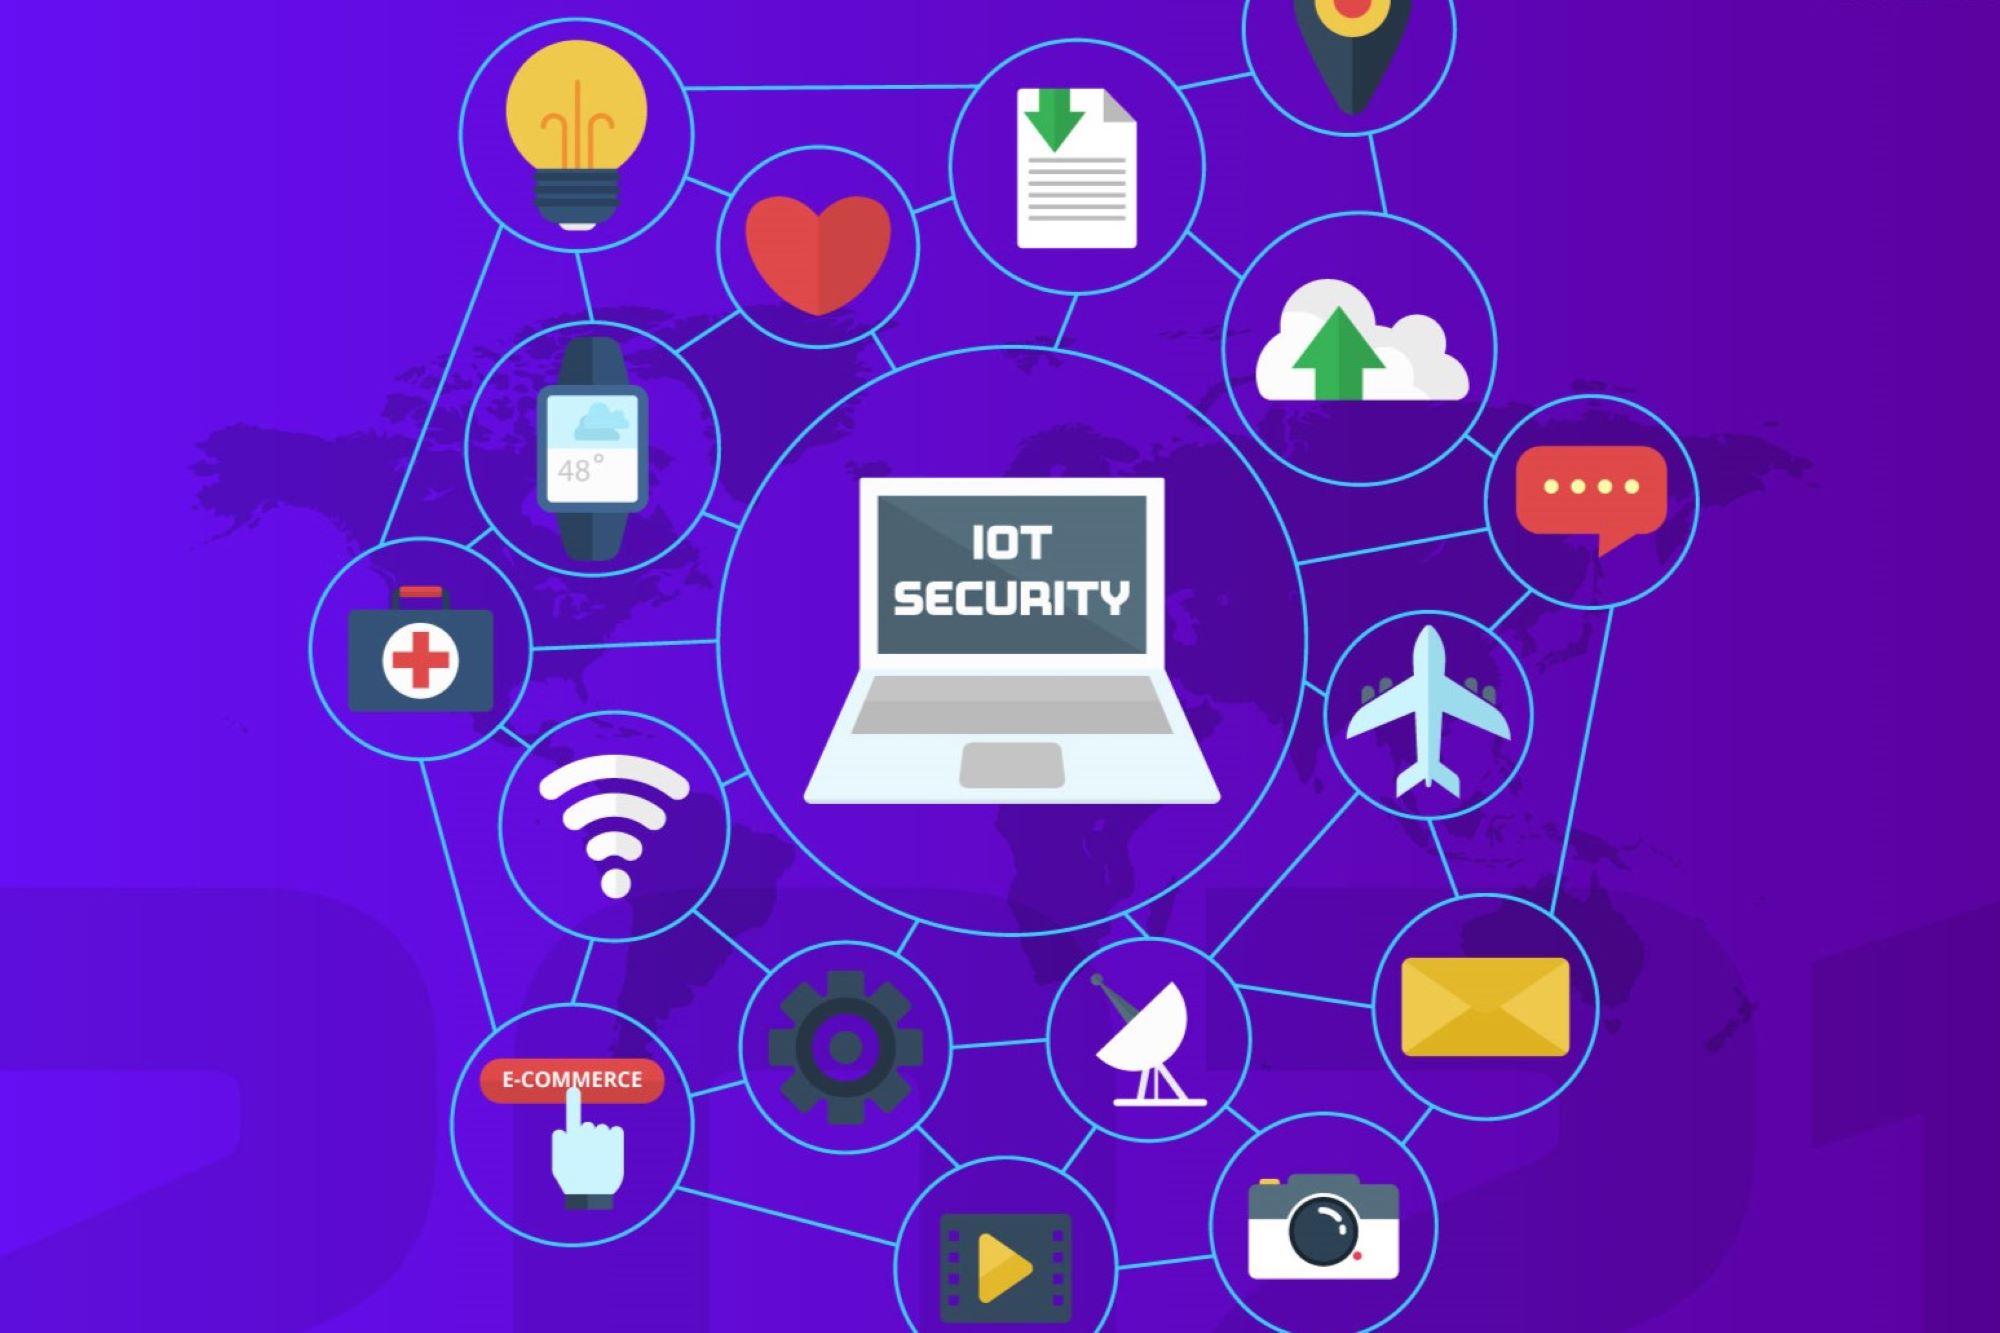 IoT Security: Ensuring Device Safety